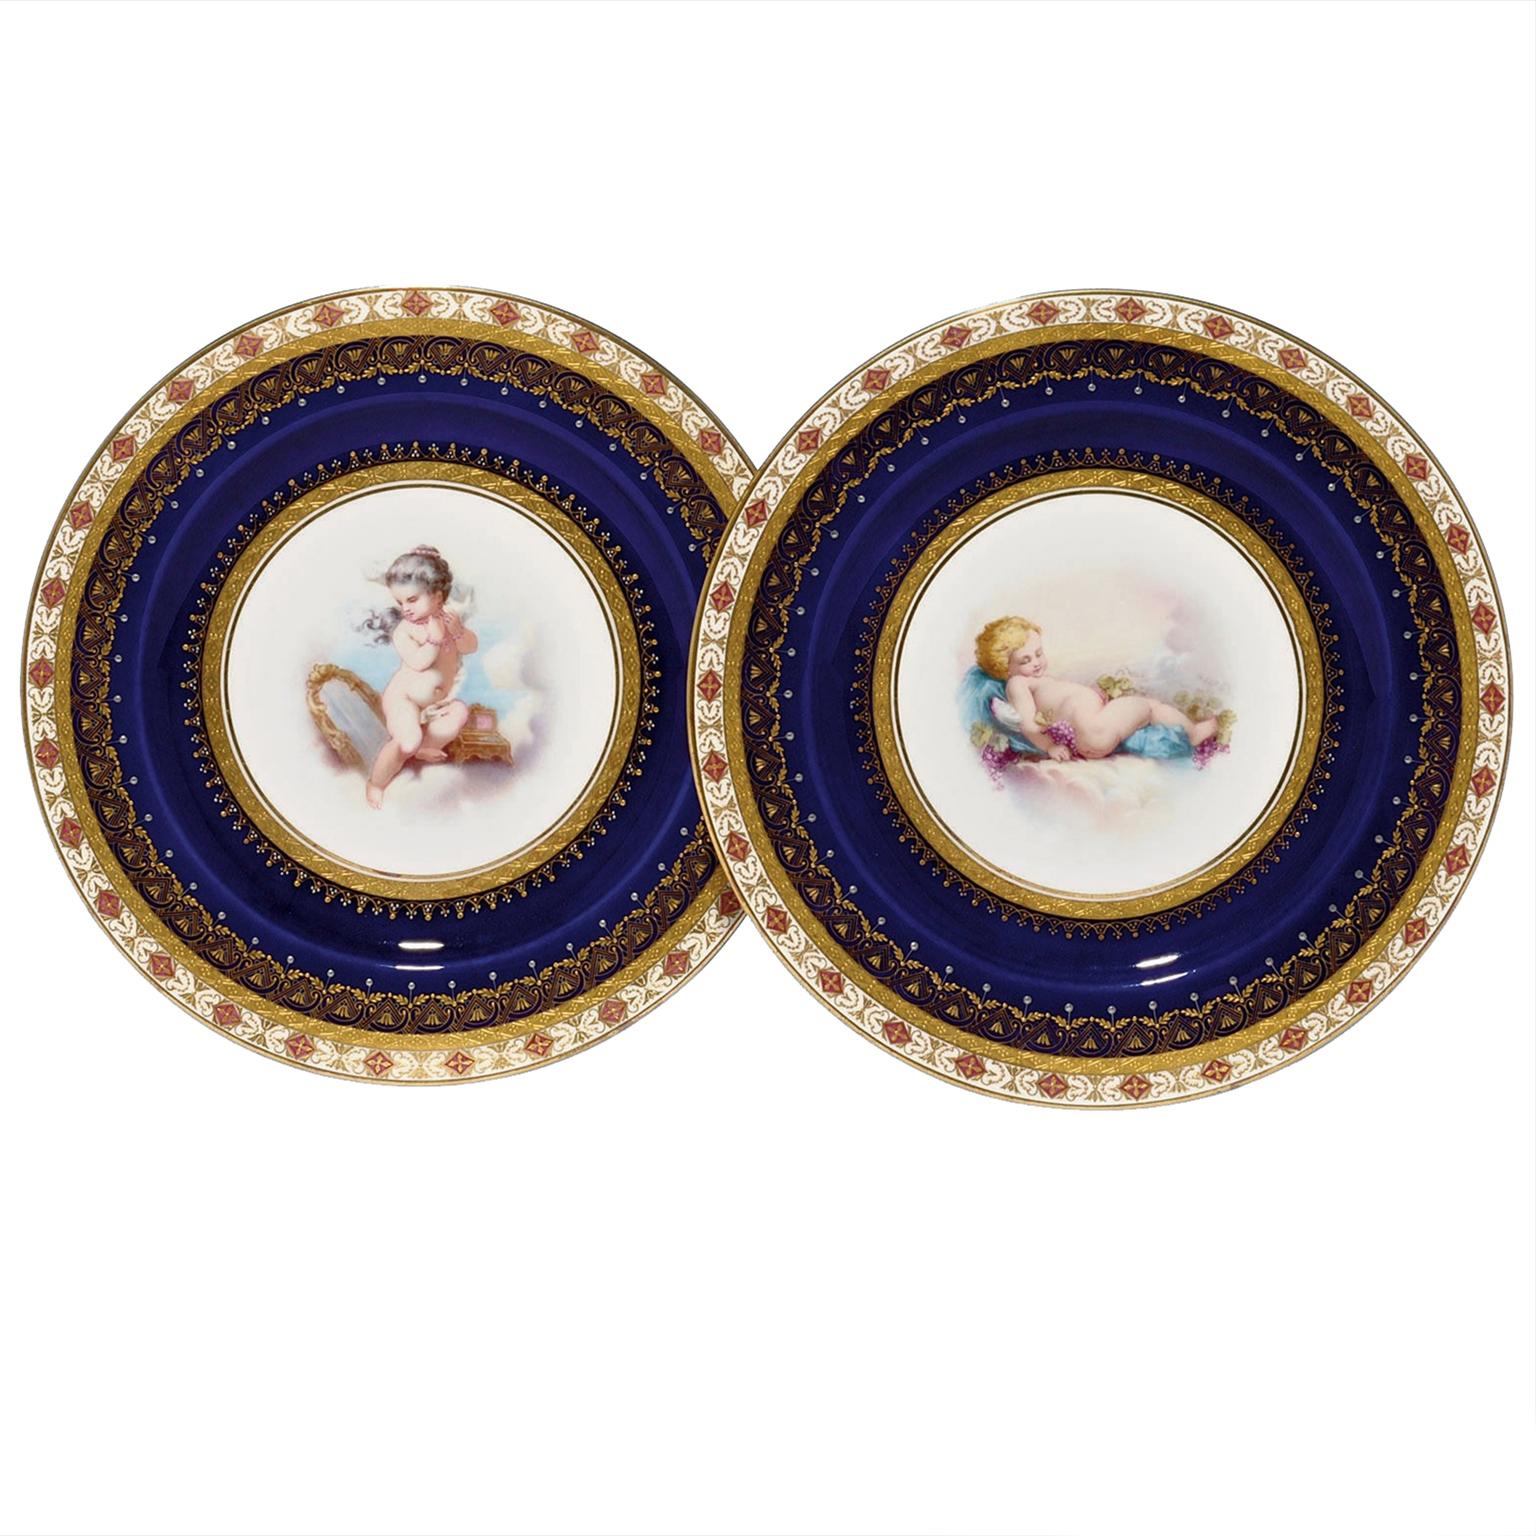 Pair of Porcelain Plates Depicting Putto at Play by Minton, Dated 1881